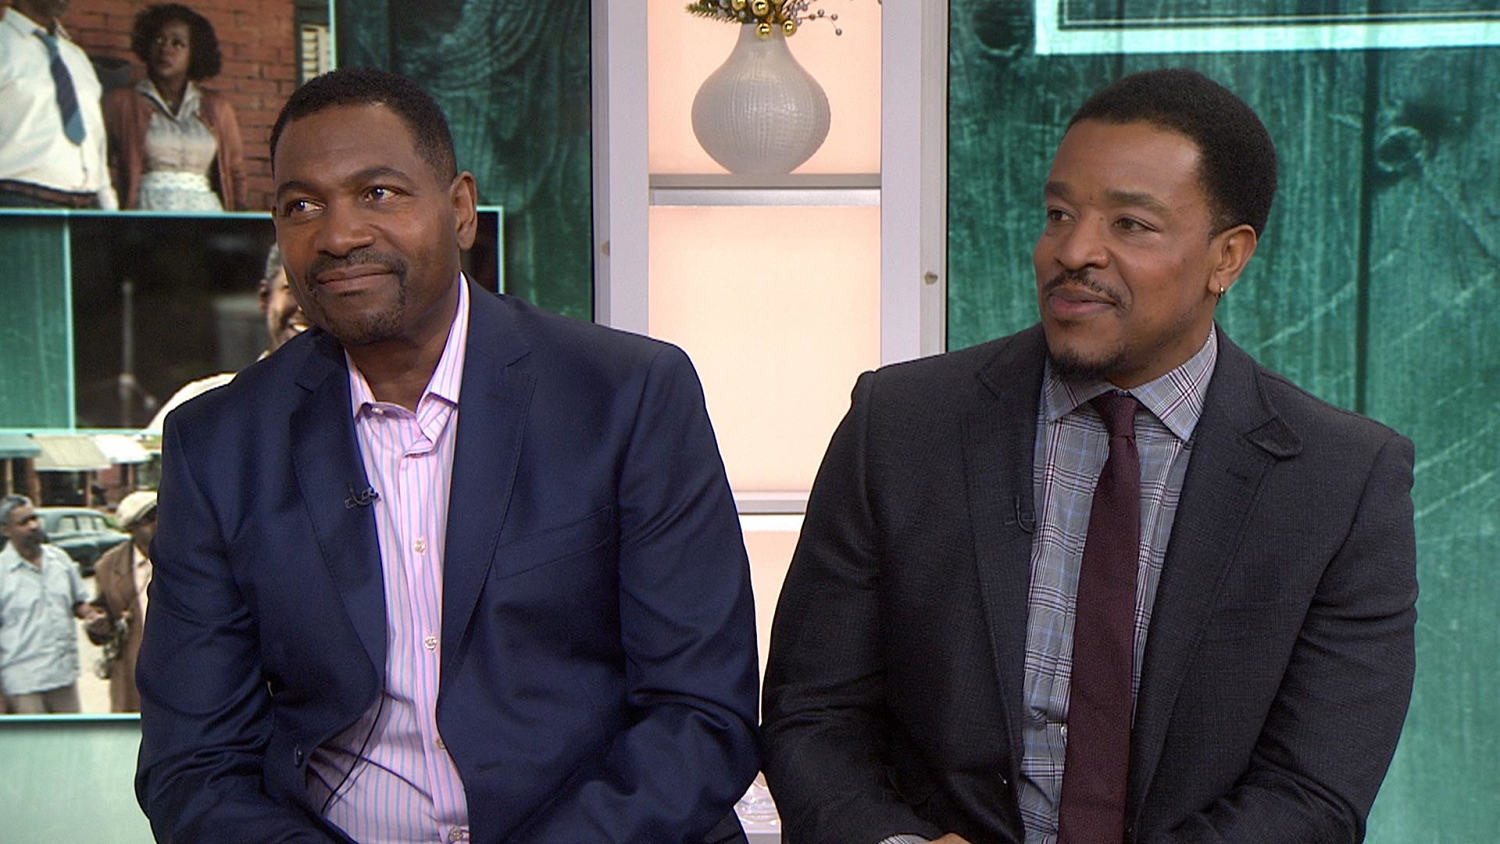 Mykelti Williamson, Russell Hornsby Fences is special for Denzel Washington